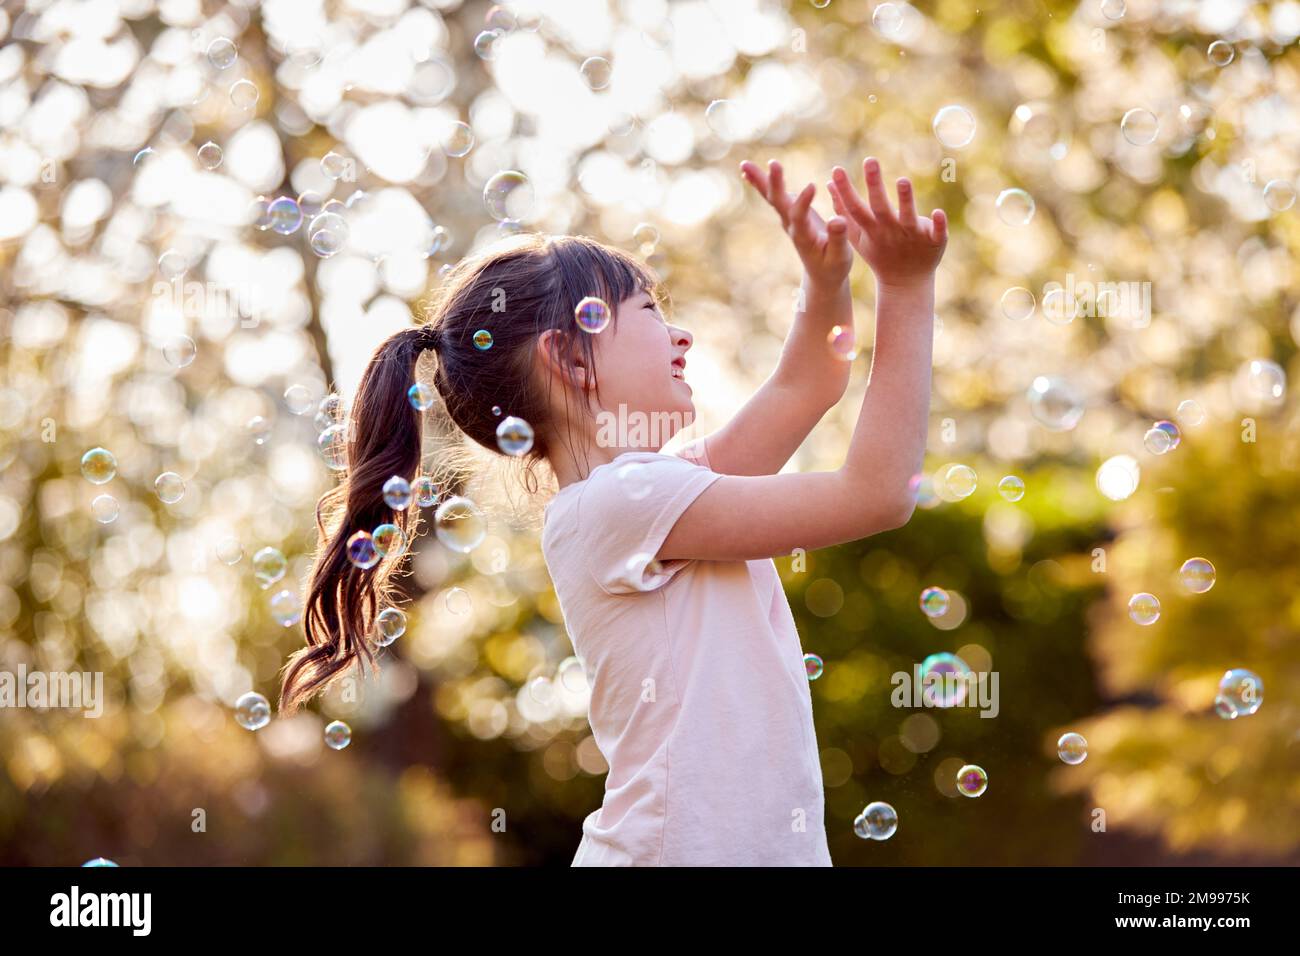 Smiling Girl Outdoors Having Fun Playing With Bubbles In Garden Stock Photo